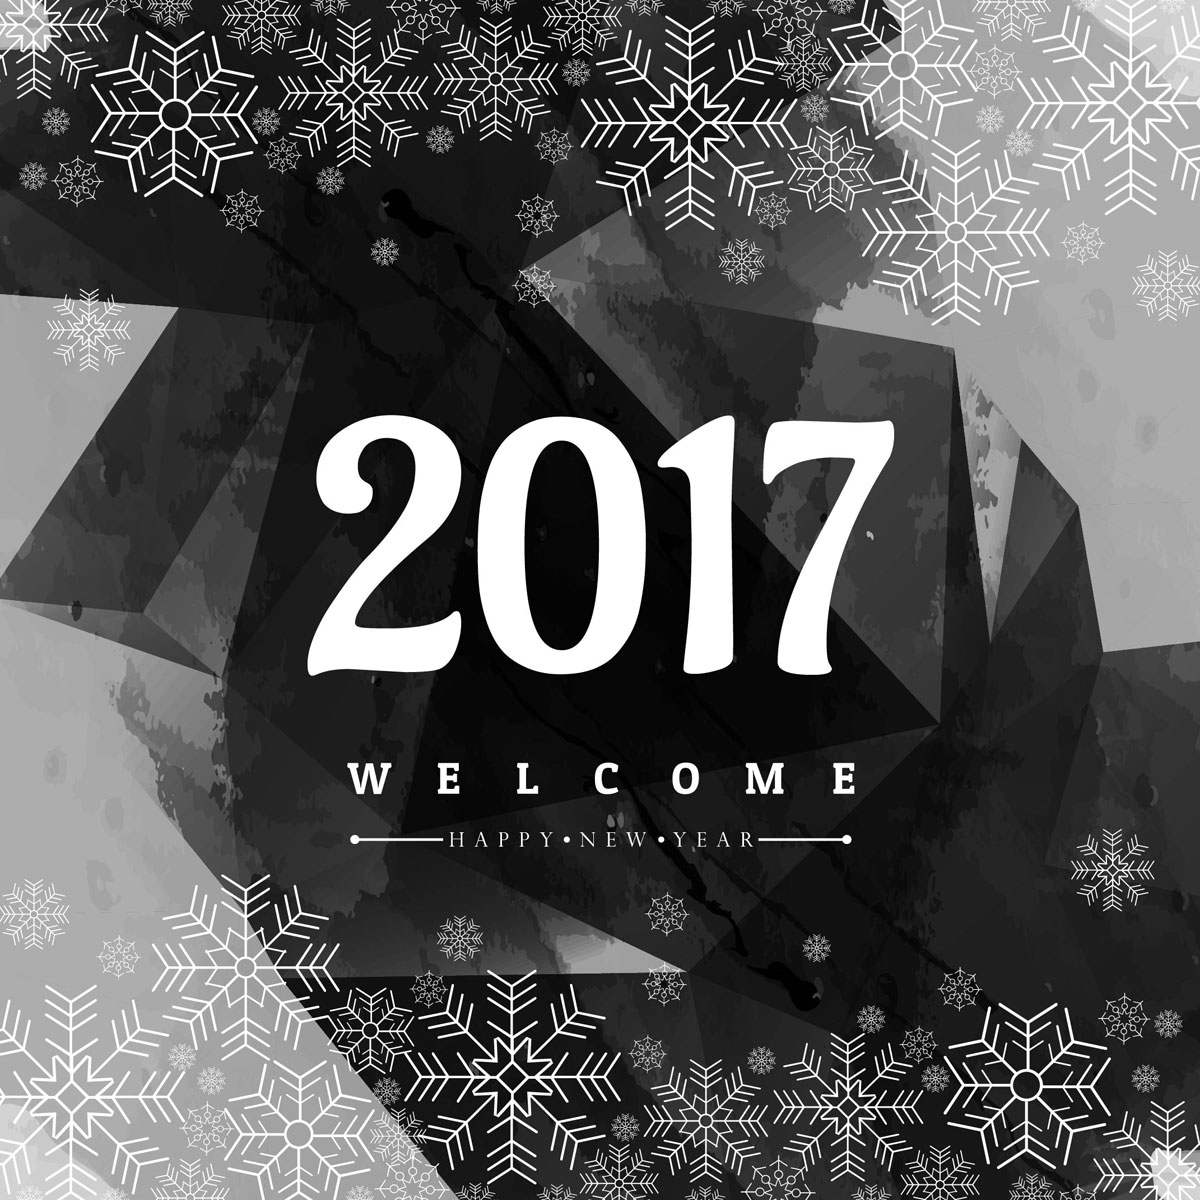 best new year wallpaper,font,text,graphic design,black and white,illustration